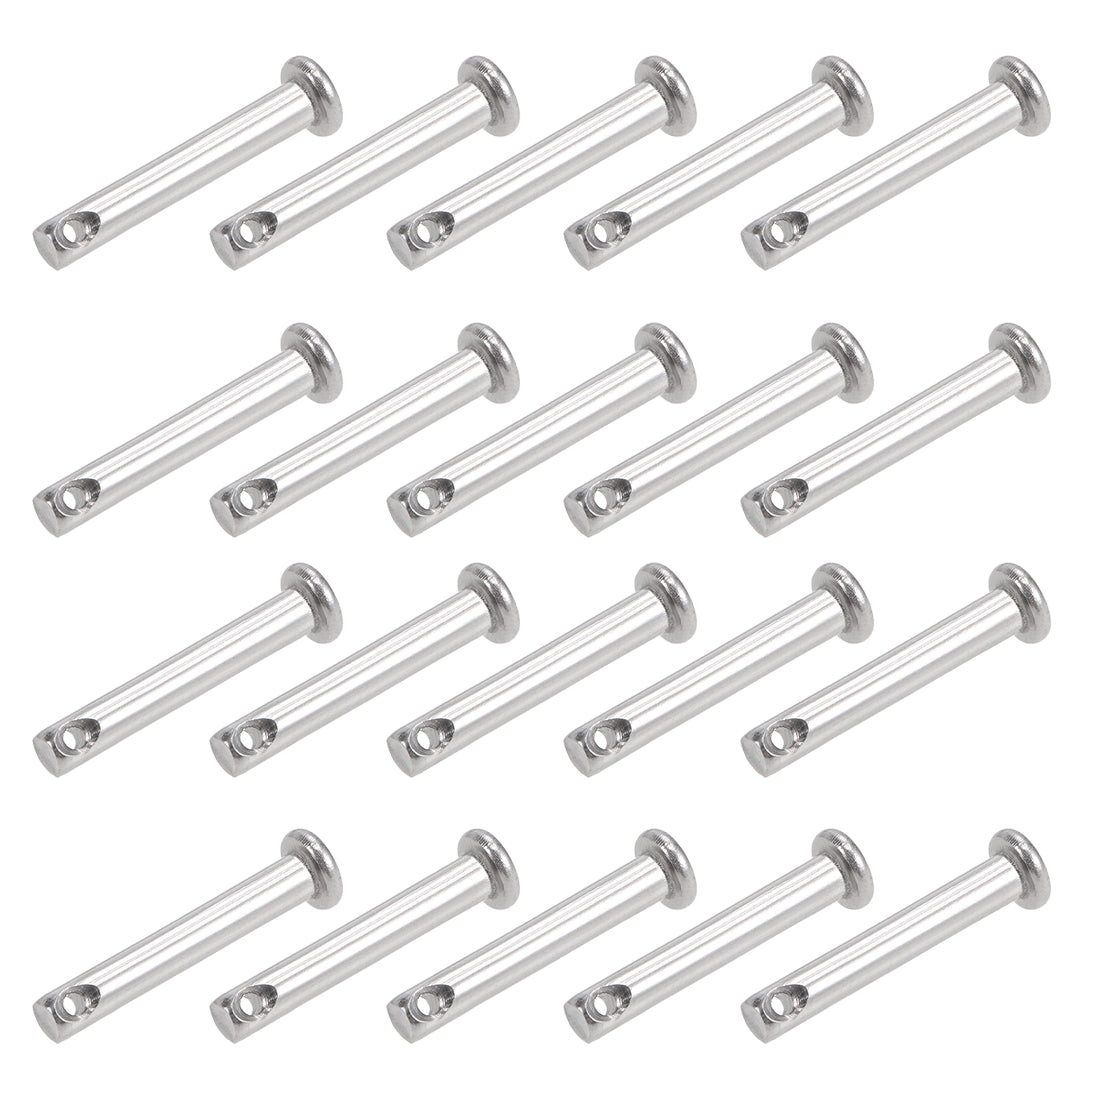 Uxcell Uxcell Single Hole Clevis Pins - 3mm x 10mm Flat Head 304 Stainless Steel Link Hinge Pin 20Pcs